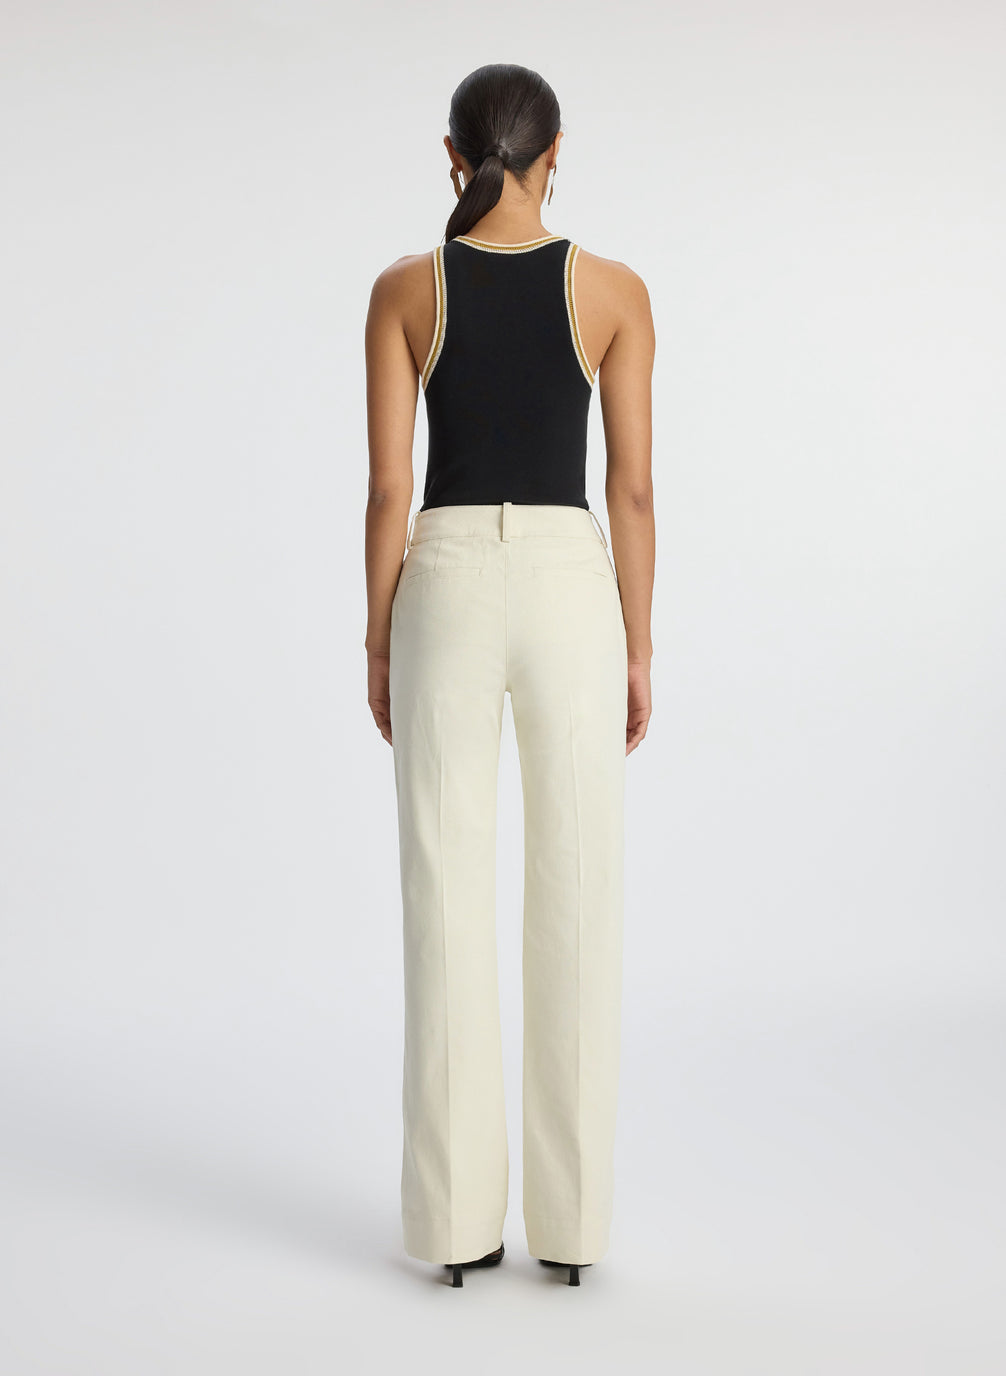 back view of woman wearing black tank top with contrast trim and cream pants